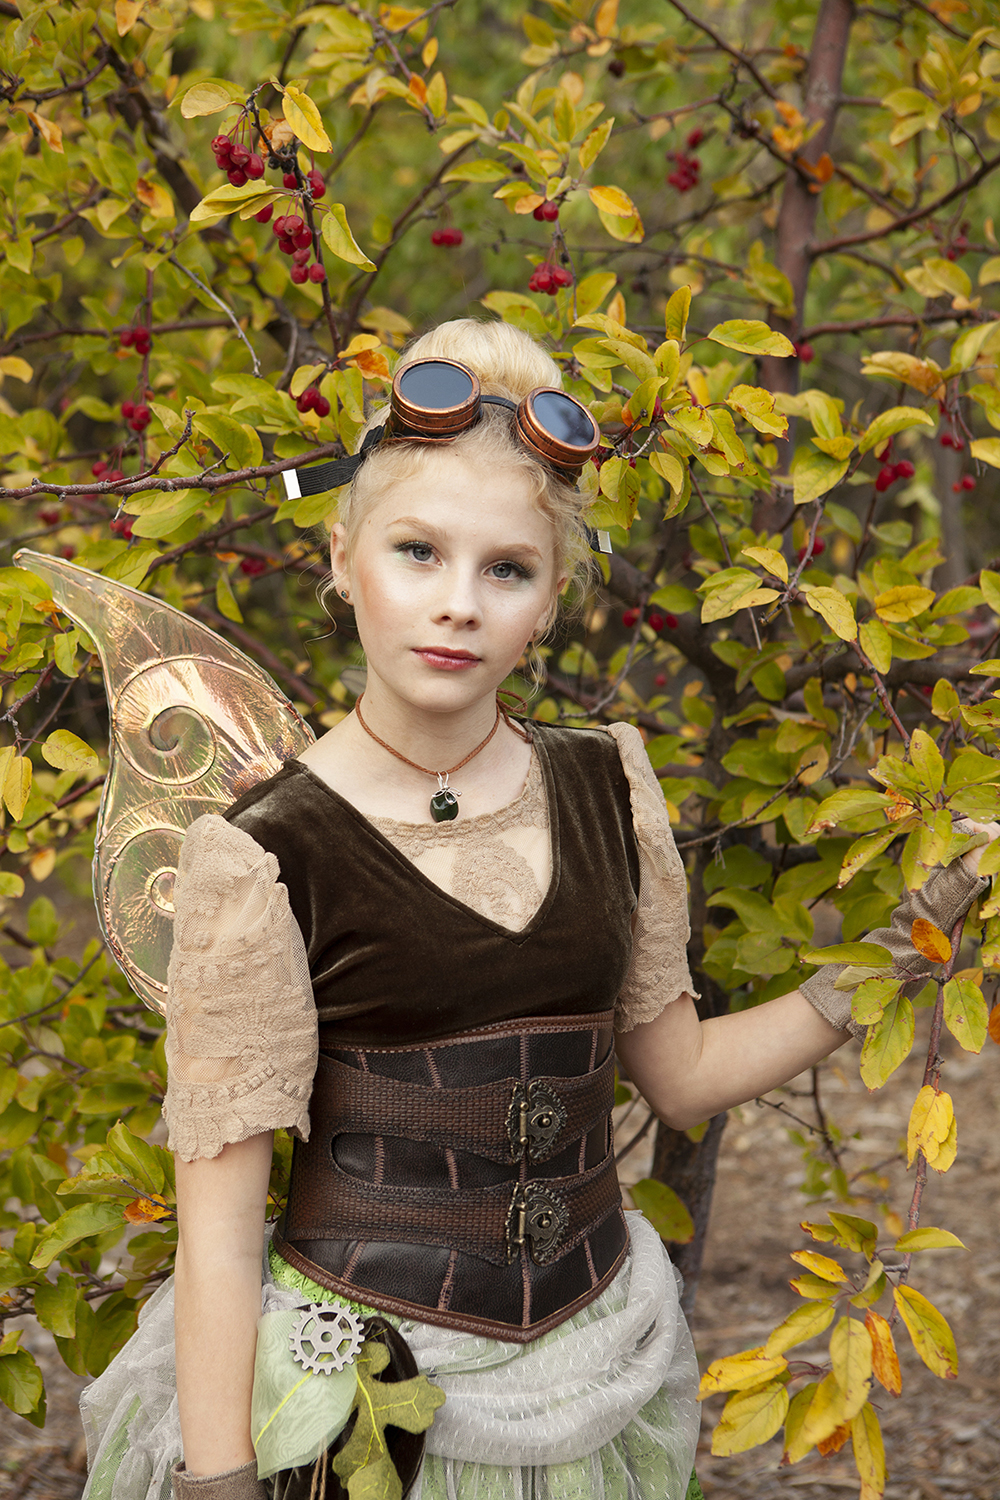 Coolest Ever DIY Steampunk Tinkerbell Costume